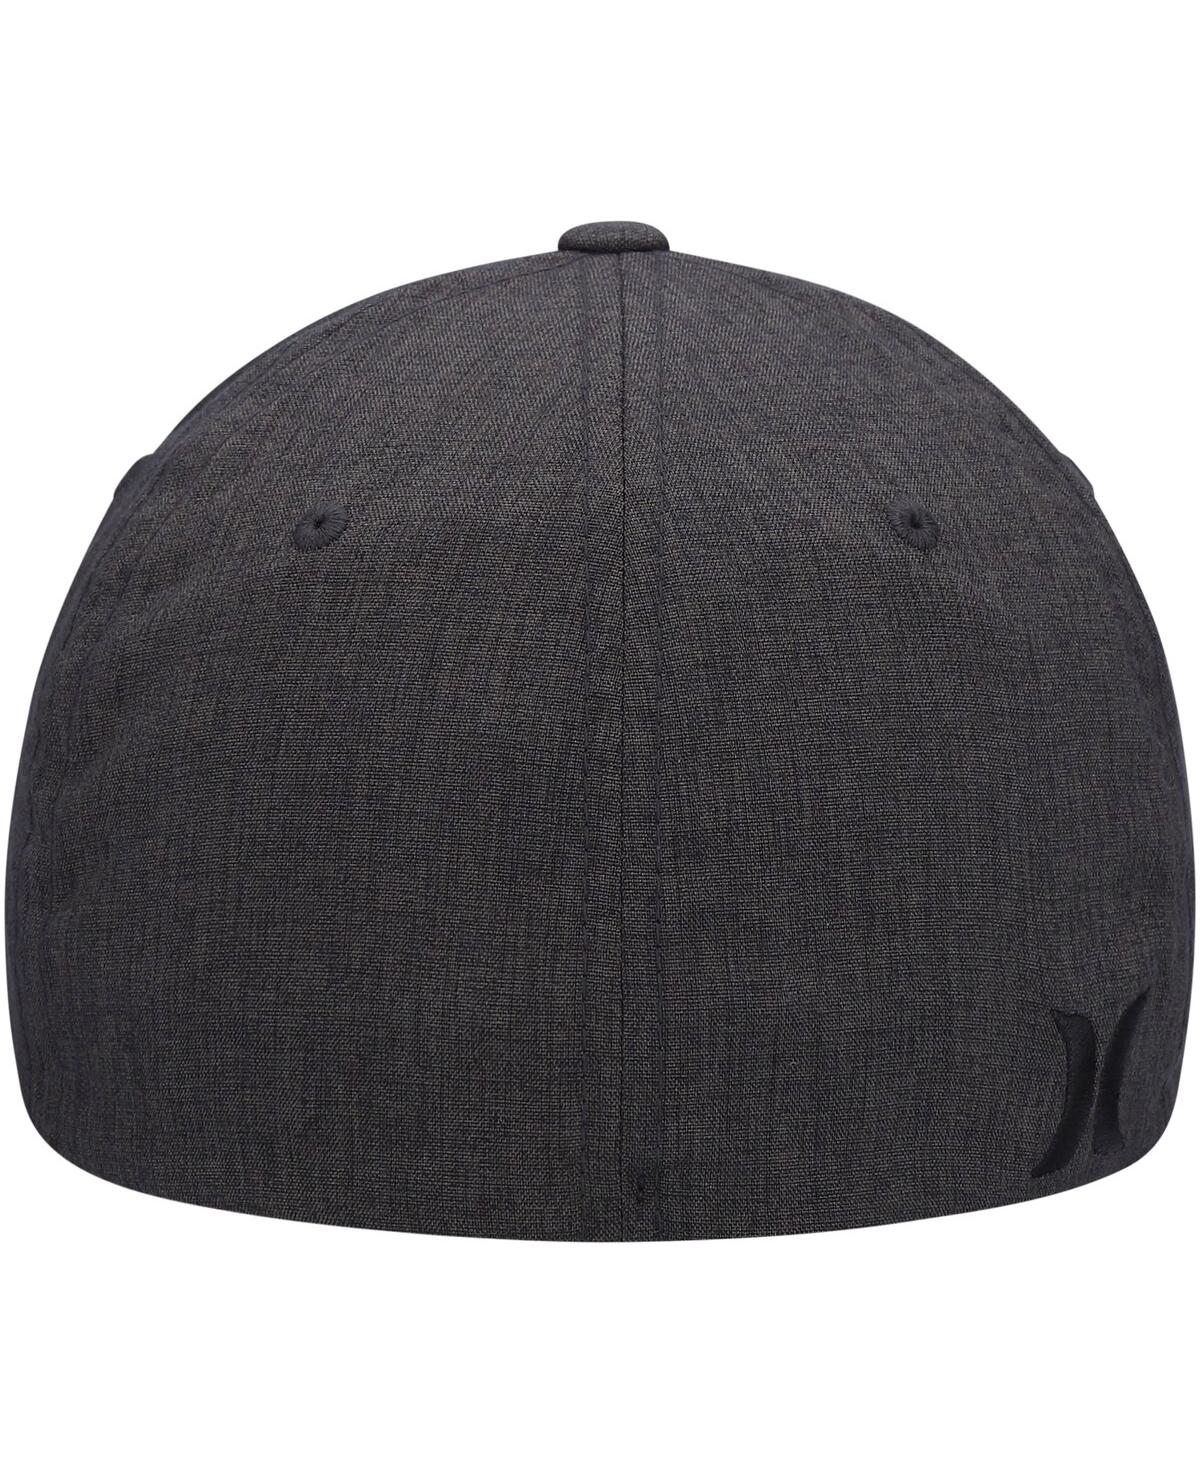 Shop Hurley Men's  Heathered Charcoal Corp Textured Tri-blend Flex Fit Hat